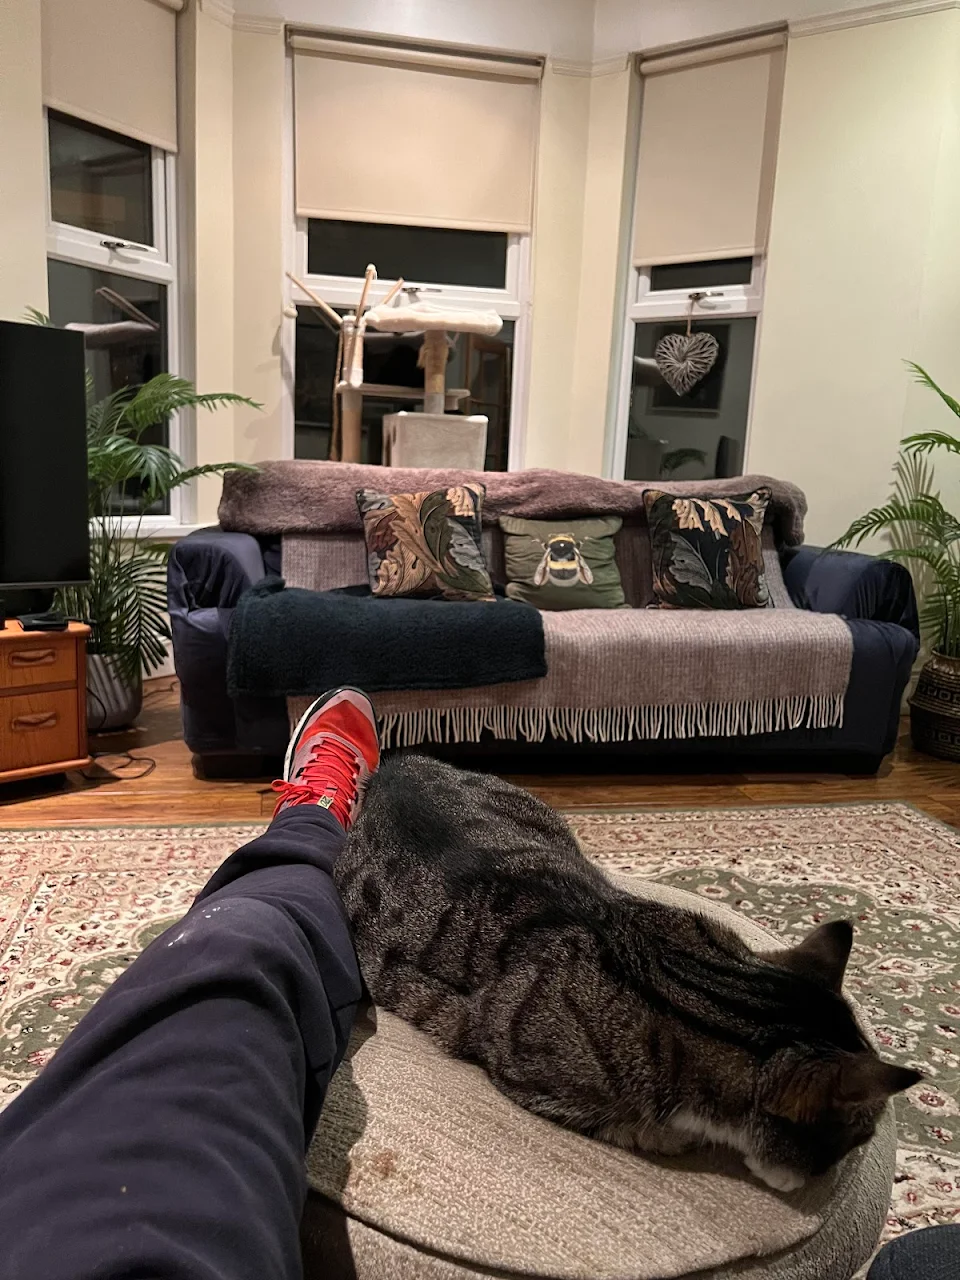 There are two cats in this photo